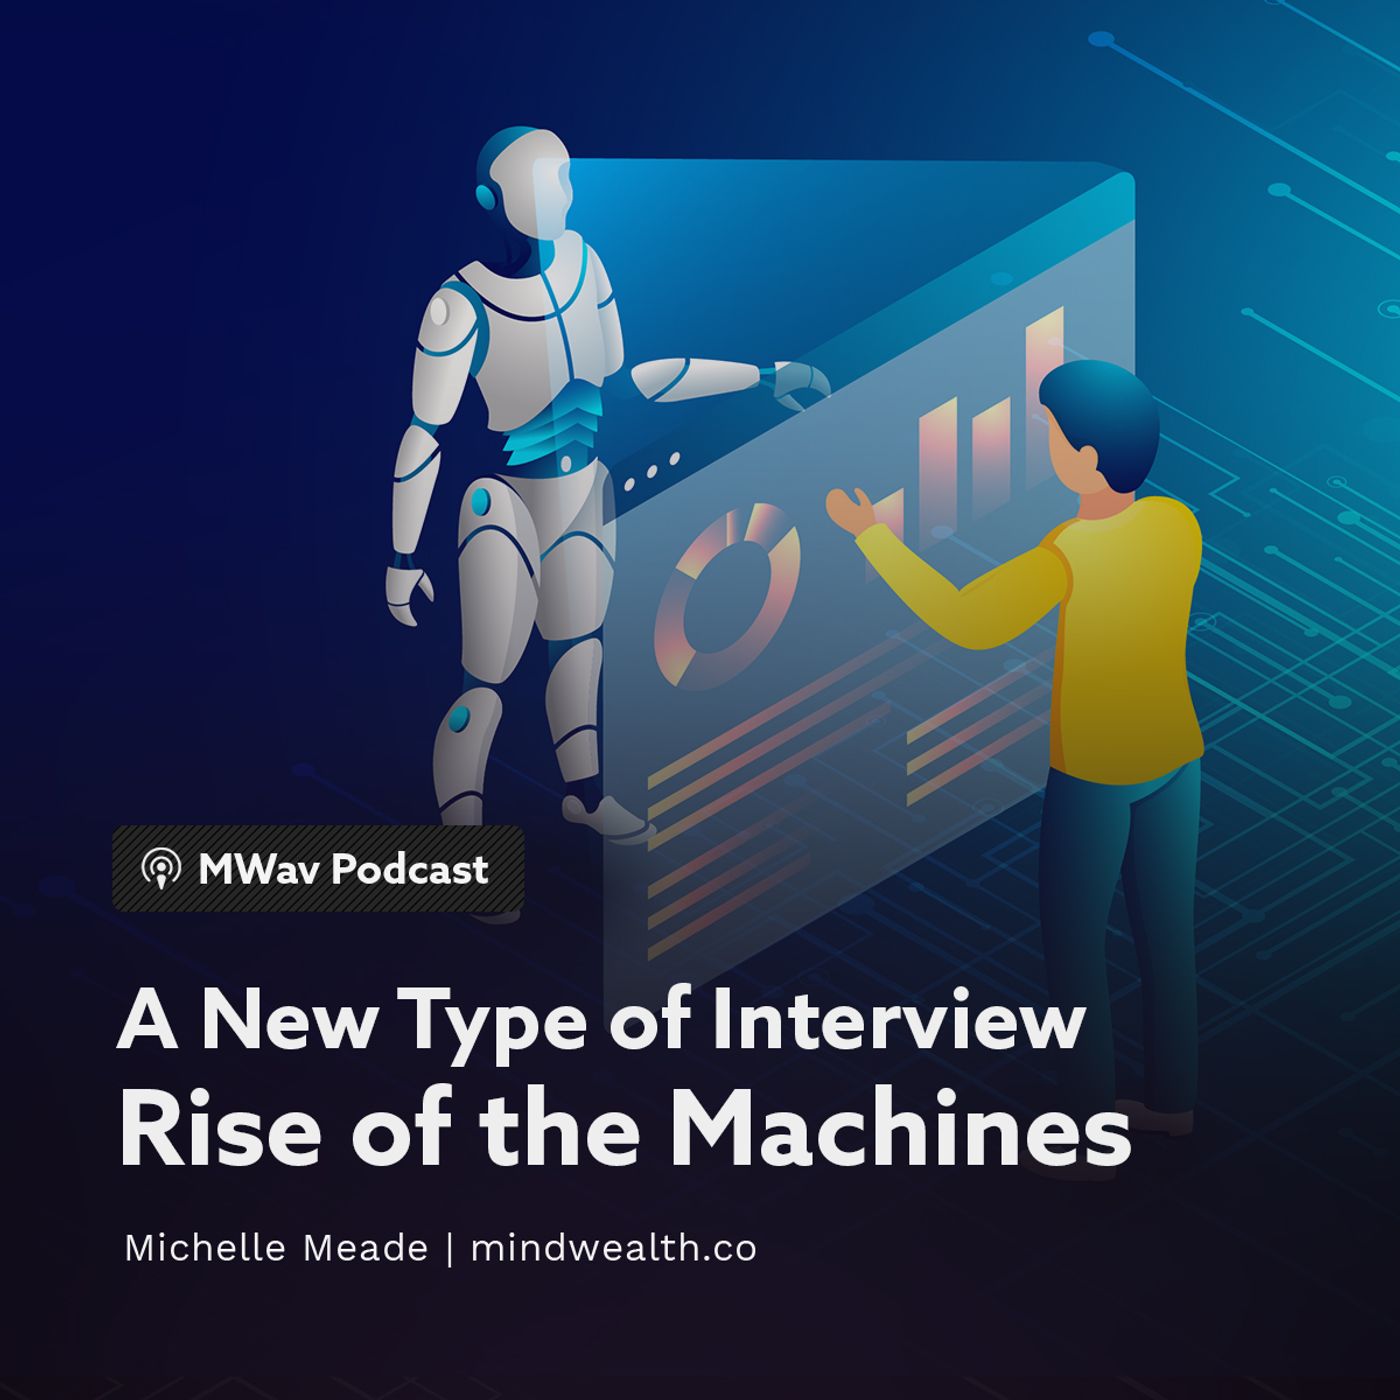 A New Type of Interview - Rise of the Machines